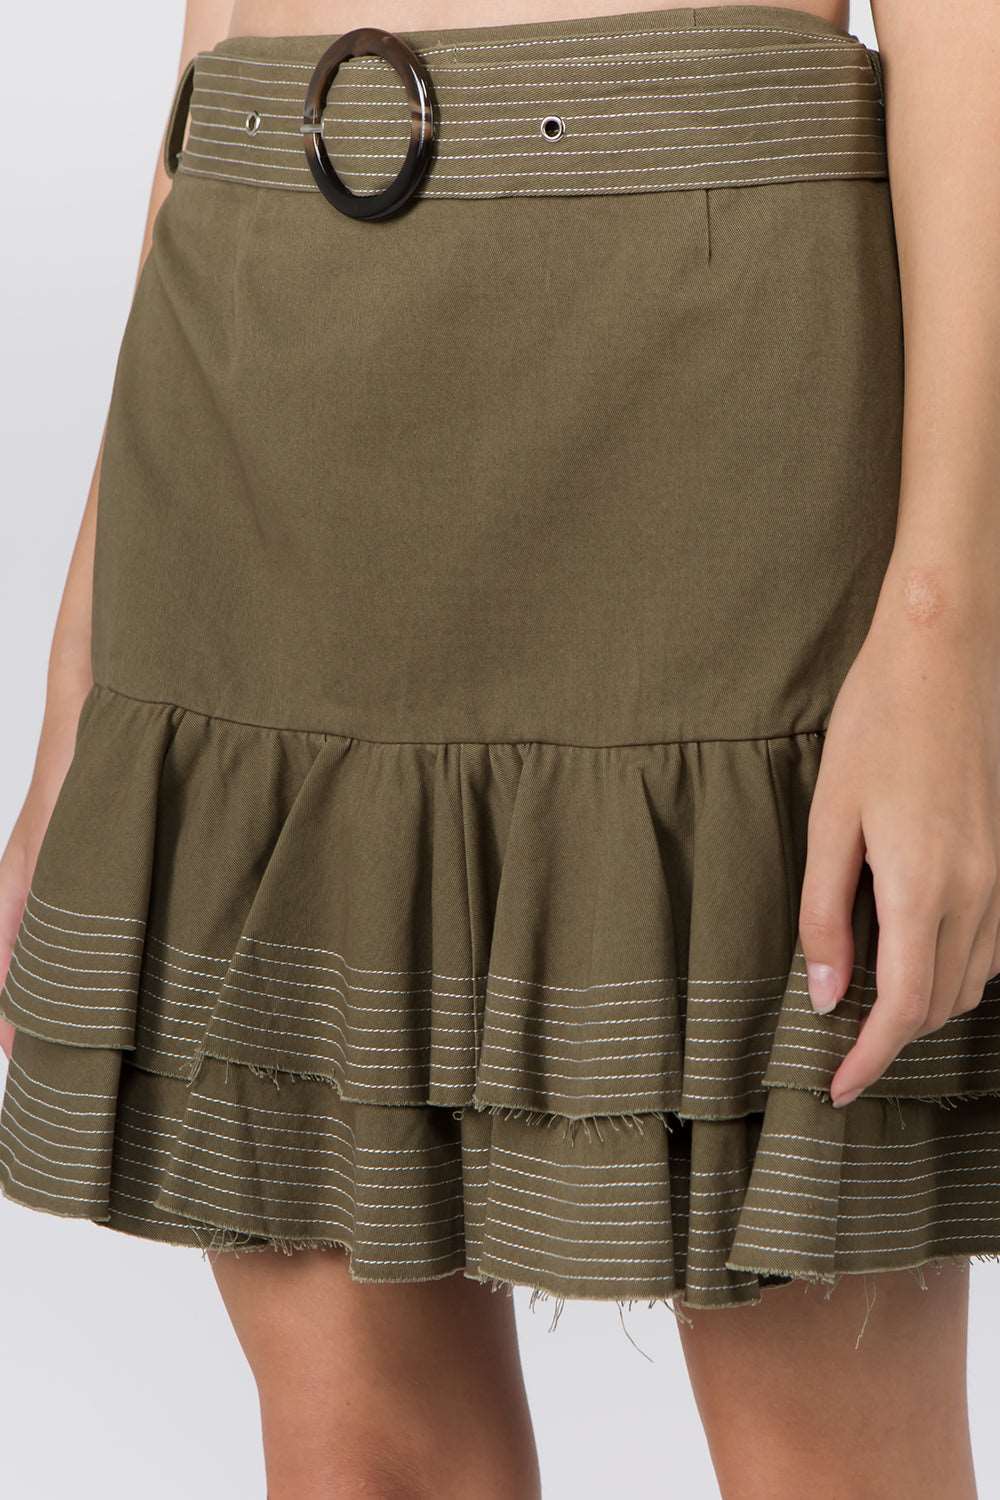 Cotton Contrast Stitched Skirt - Whiteroom+Cactus